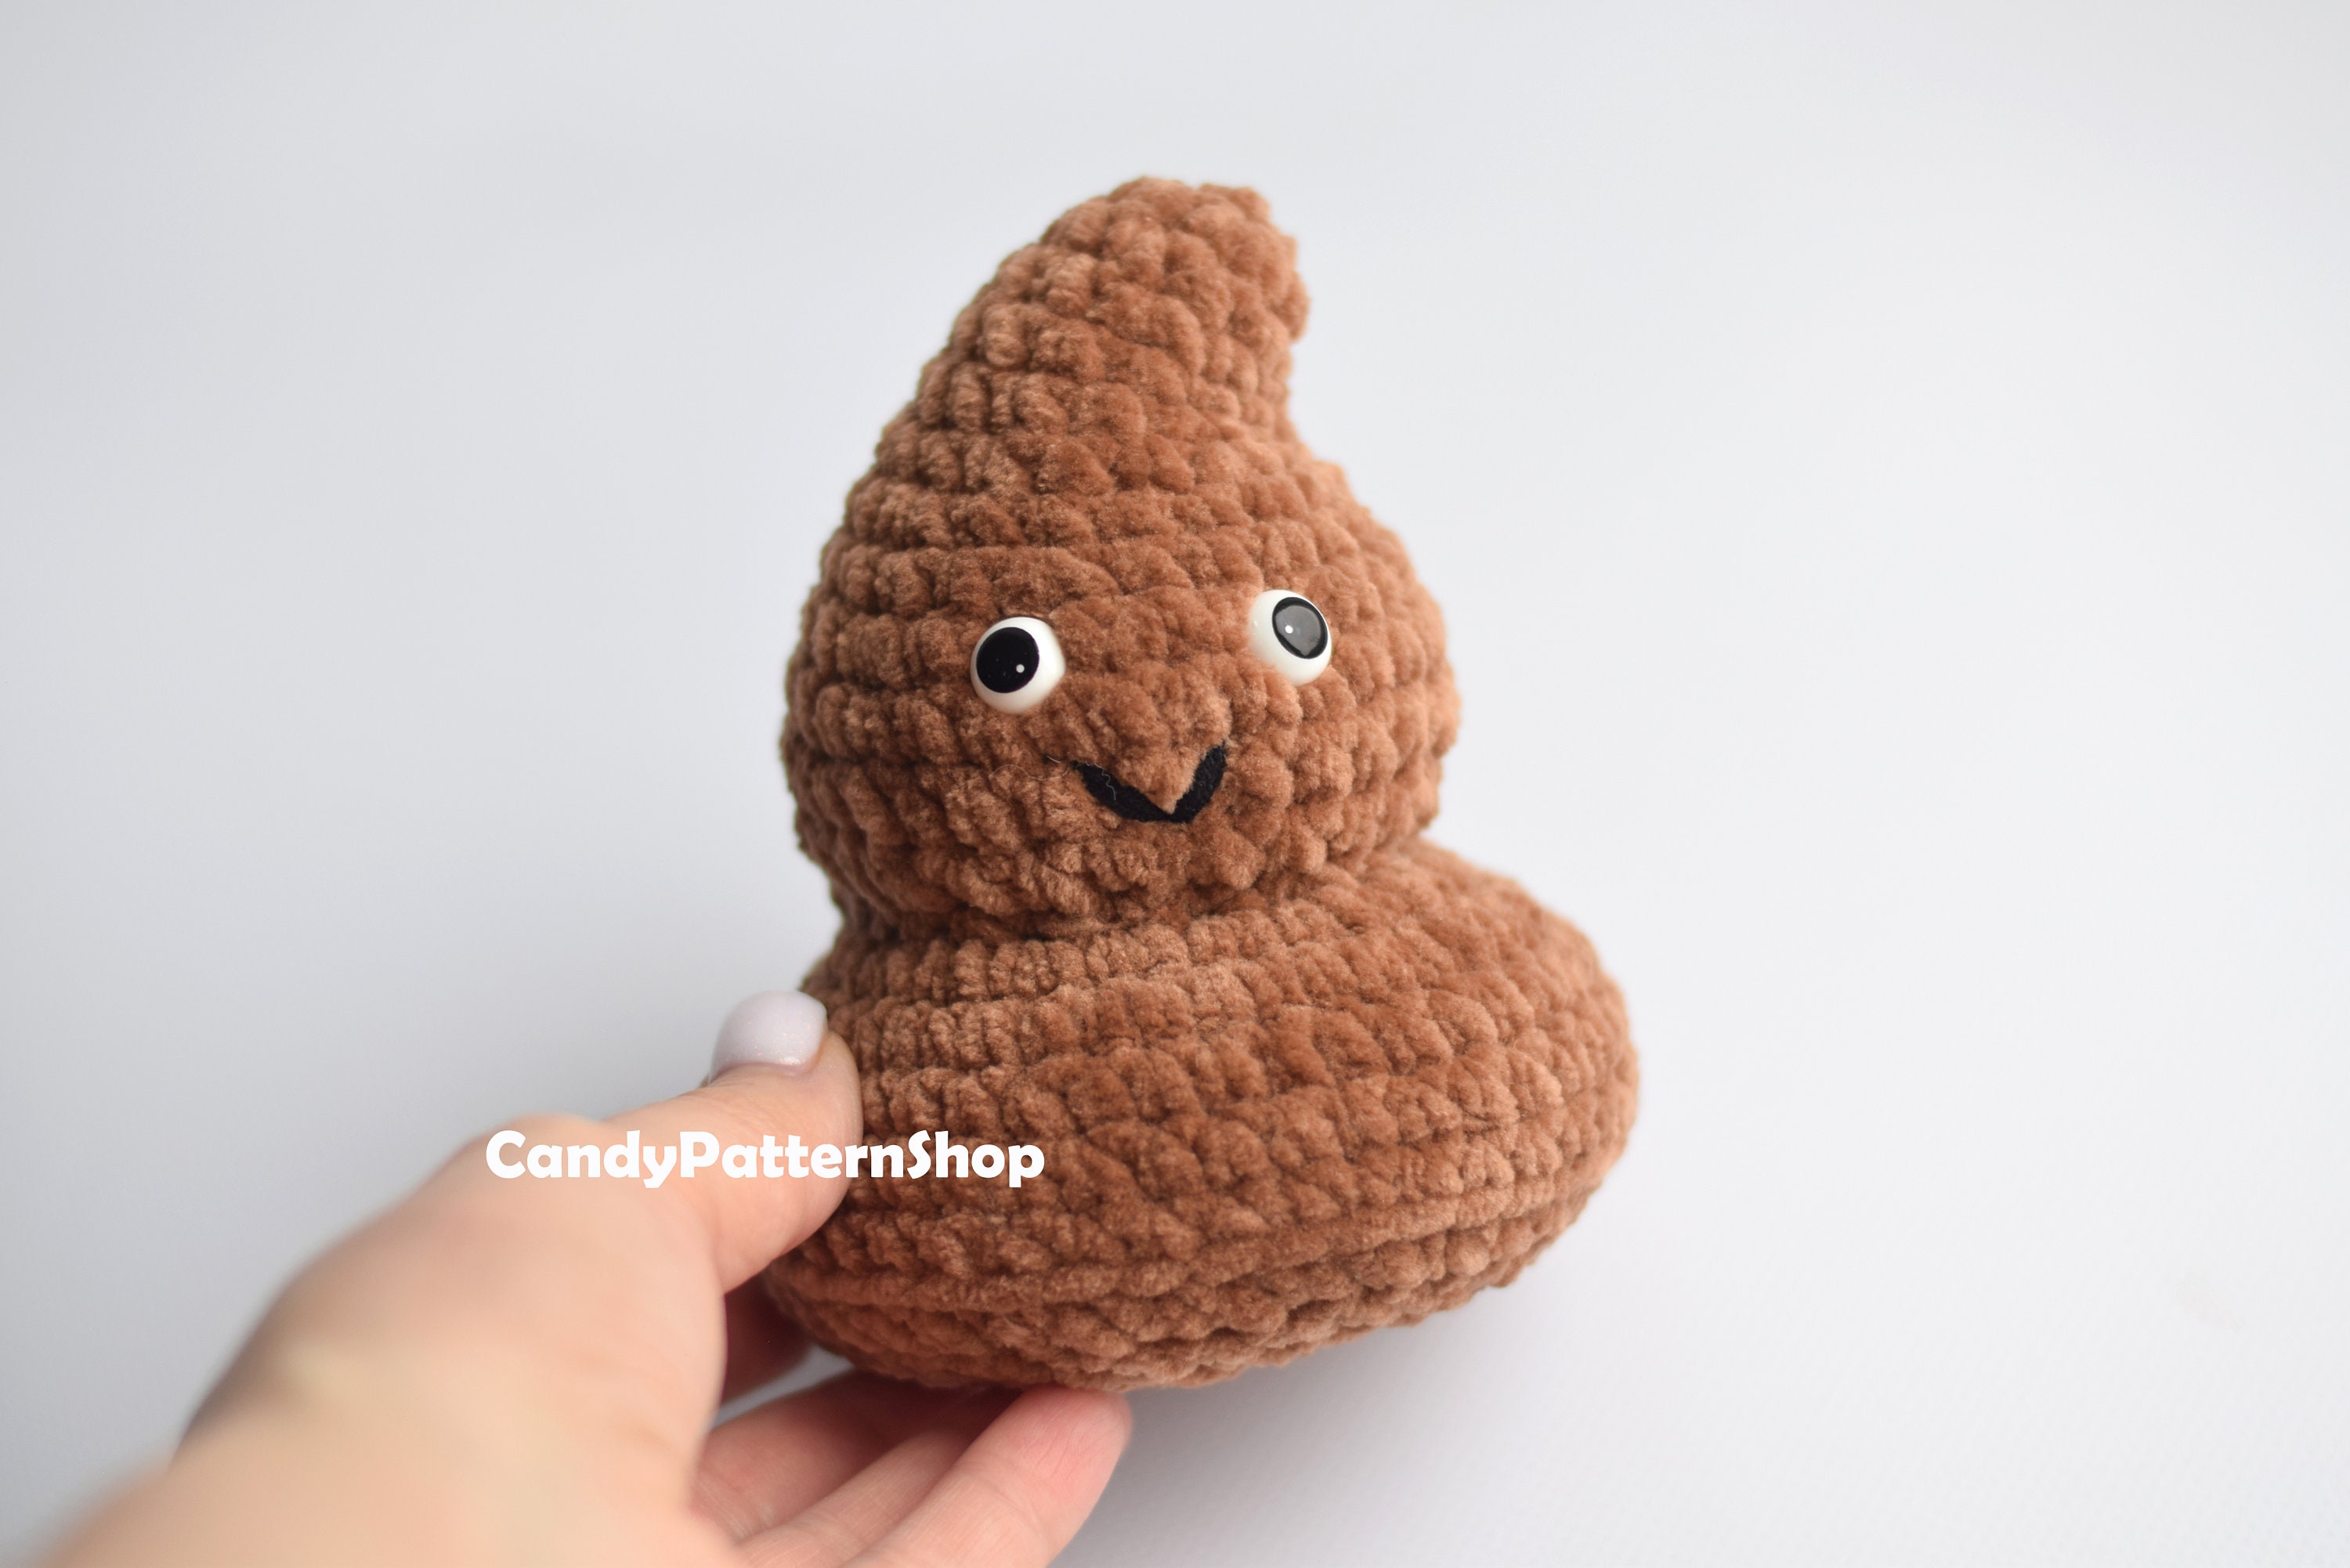  Handmade Funny Positive Poo Crochet Poo Stuffed Crafts  Amigurumi Poo Plush Emotional Support Poo for Birthday Christmas Gifts  Encouragement Funny Gag Gifts : Handmade Products